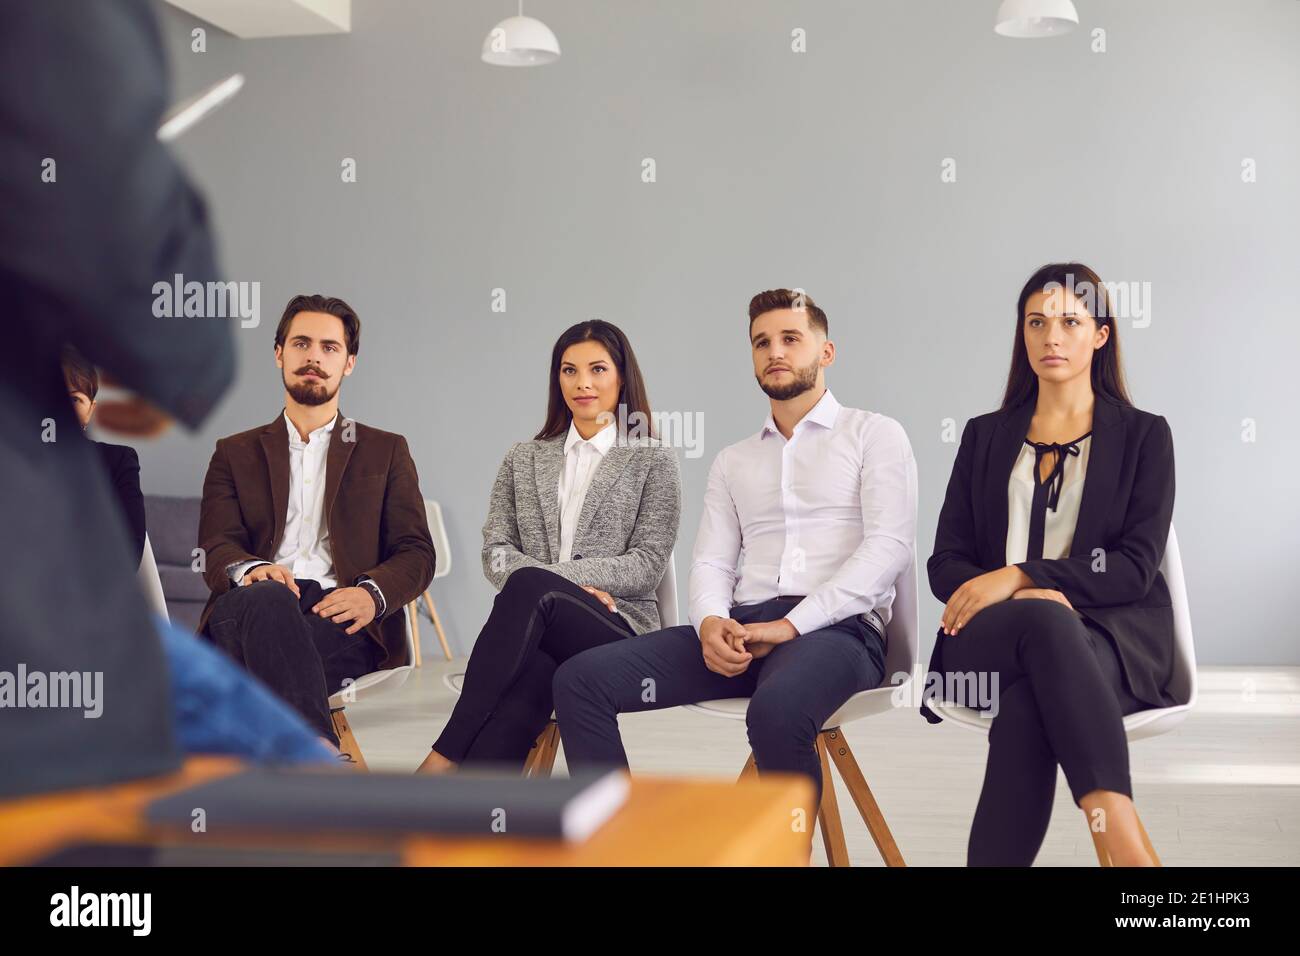 Group of company workers listening to businessman or executive manager making presentation or training Stock Photo